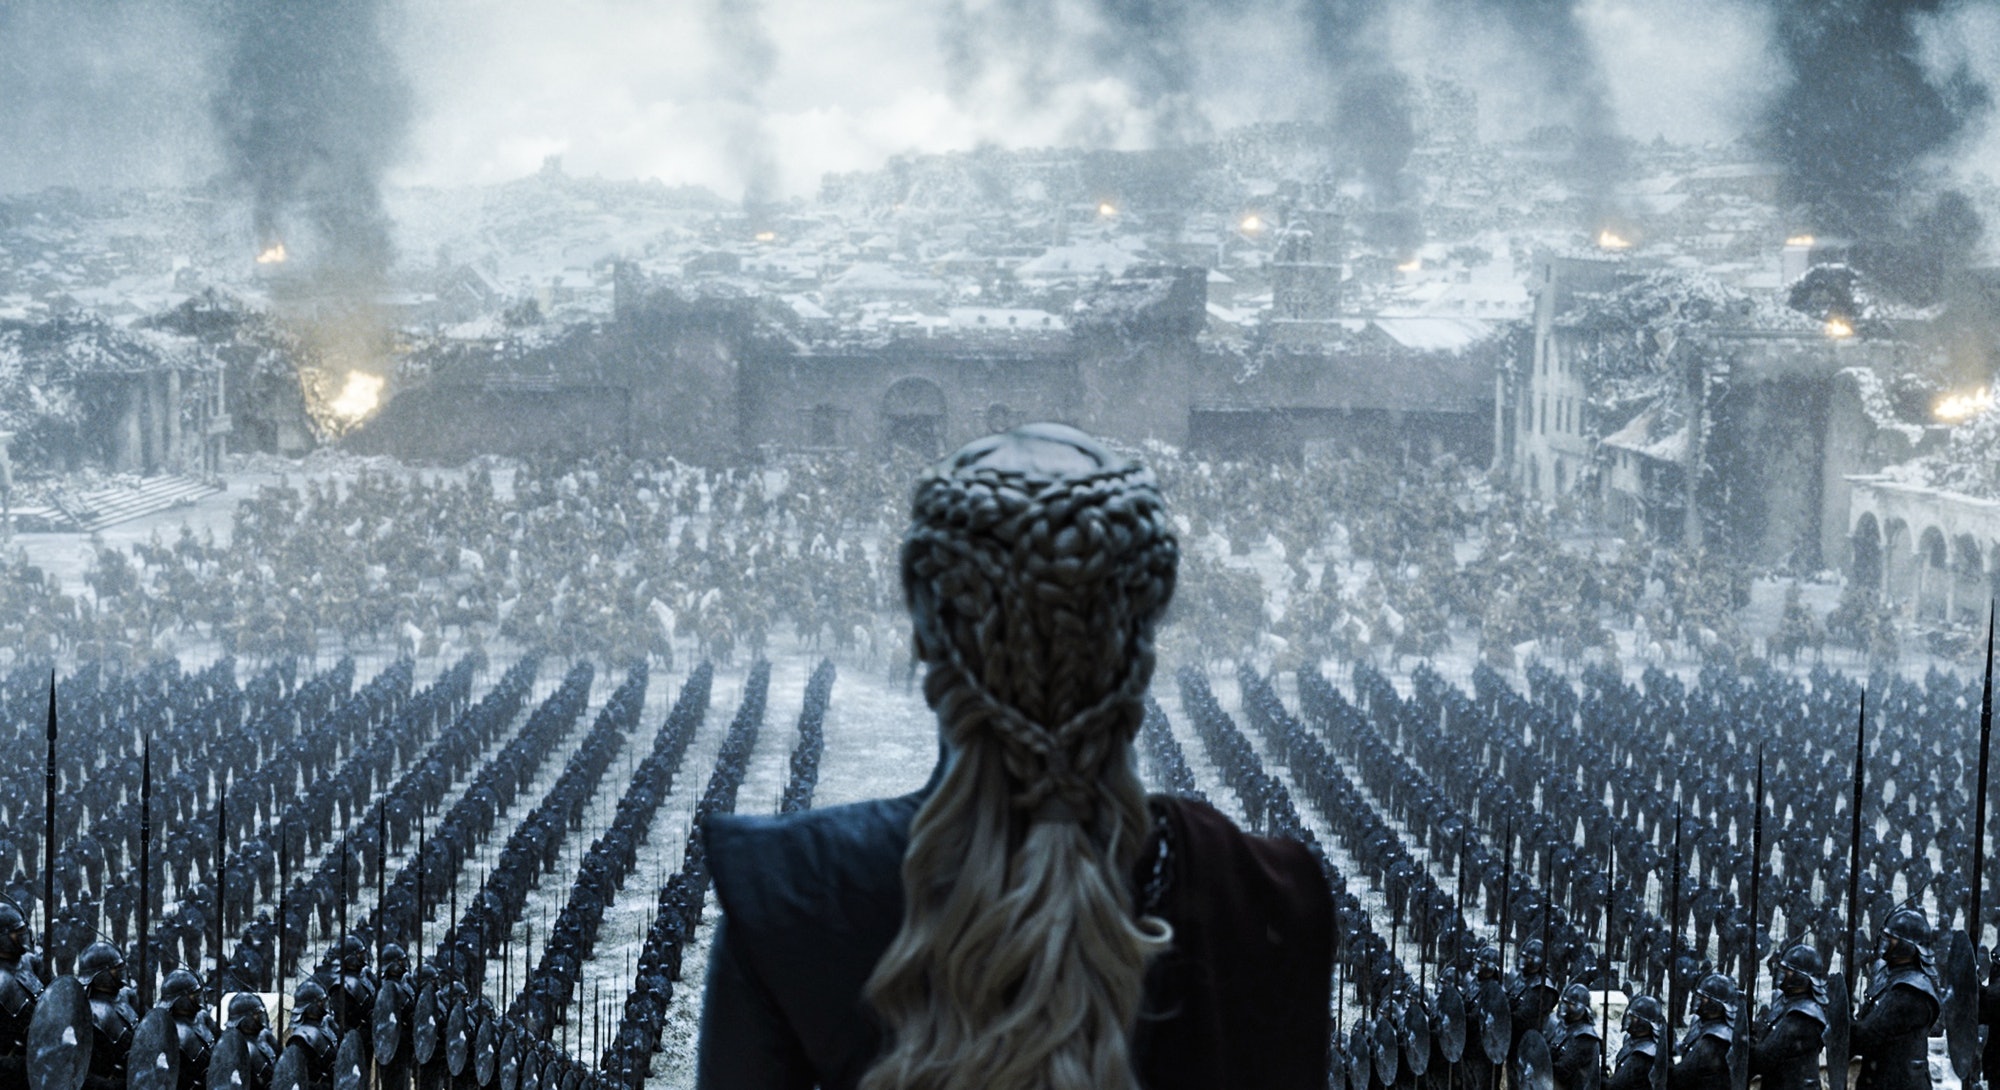 A shot taken from behind Khaleesi's head as she overlooks her army after defeating Cersei at King's Landing.